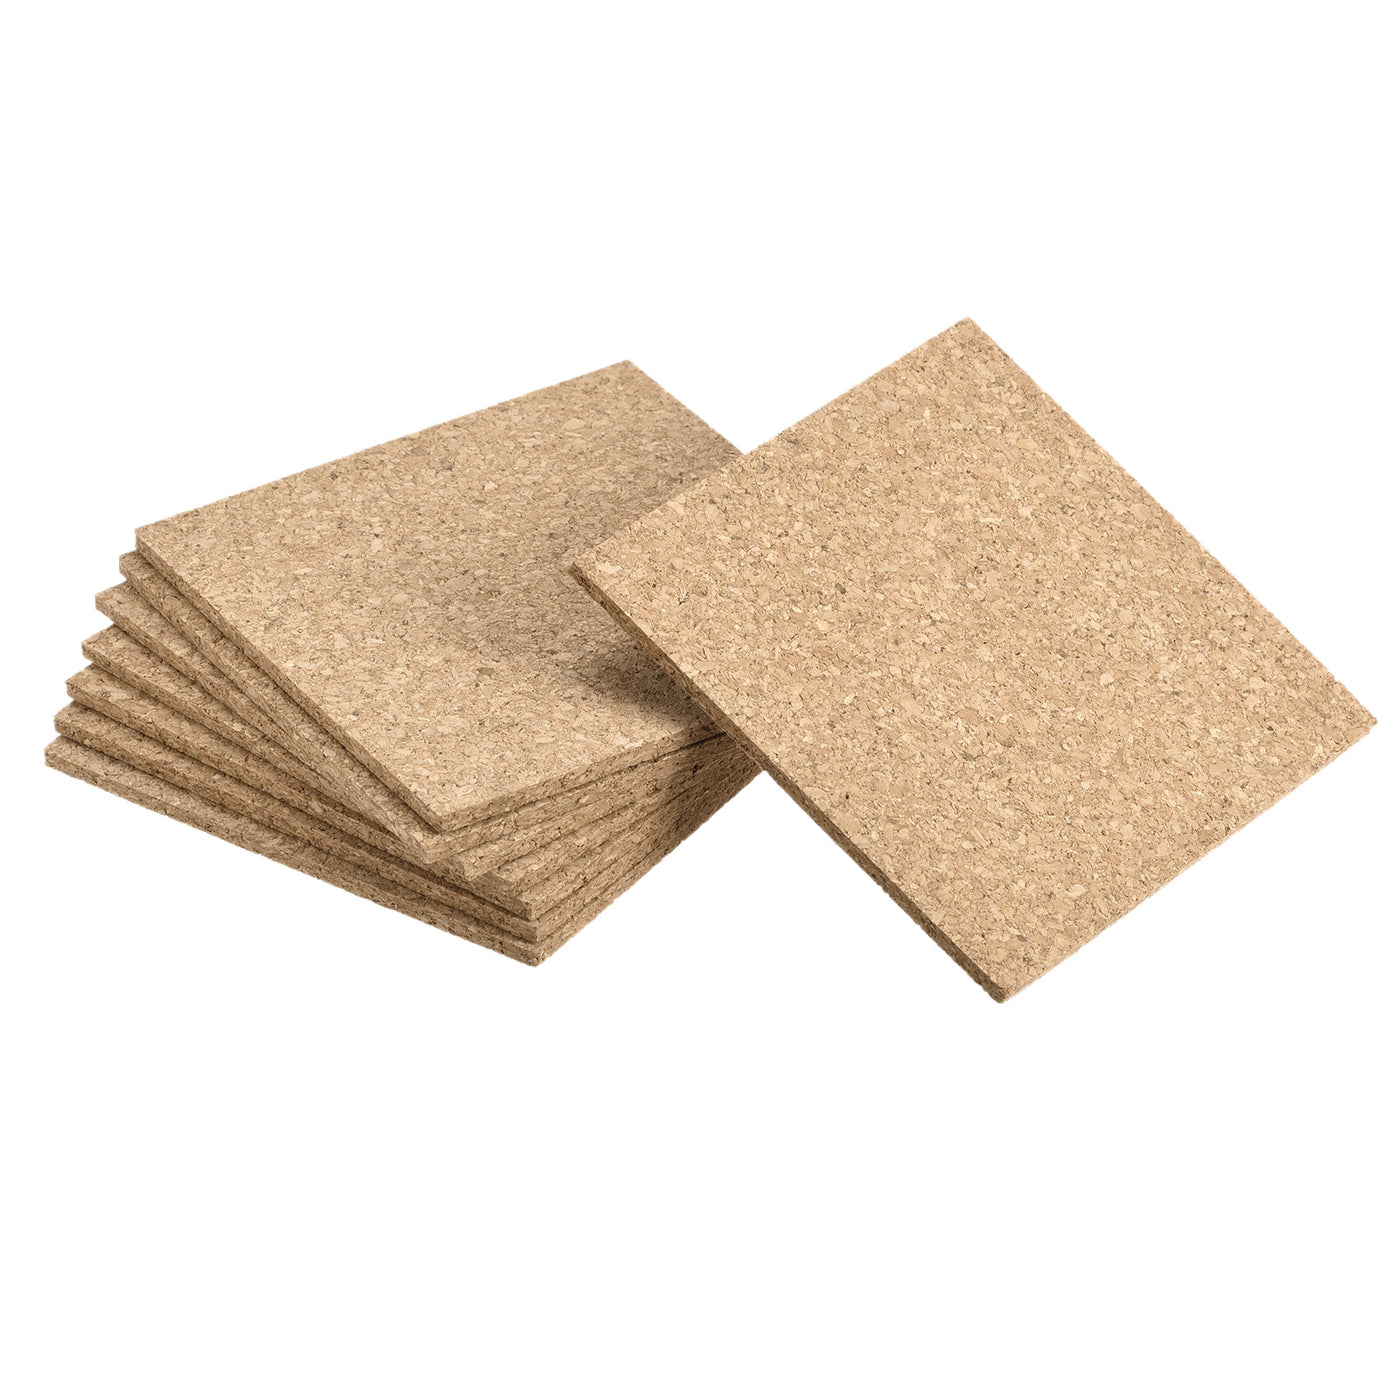 uxcell Uxcell 95x95x3mm Square Coasters Cork Cup Mat Pad for Tableware 8pcs